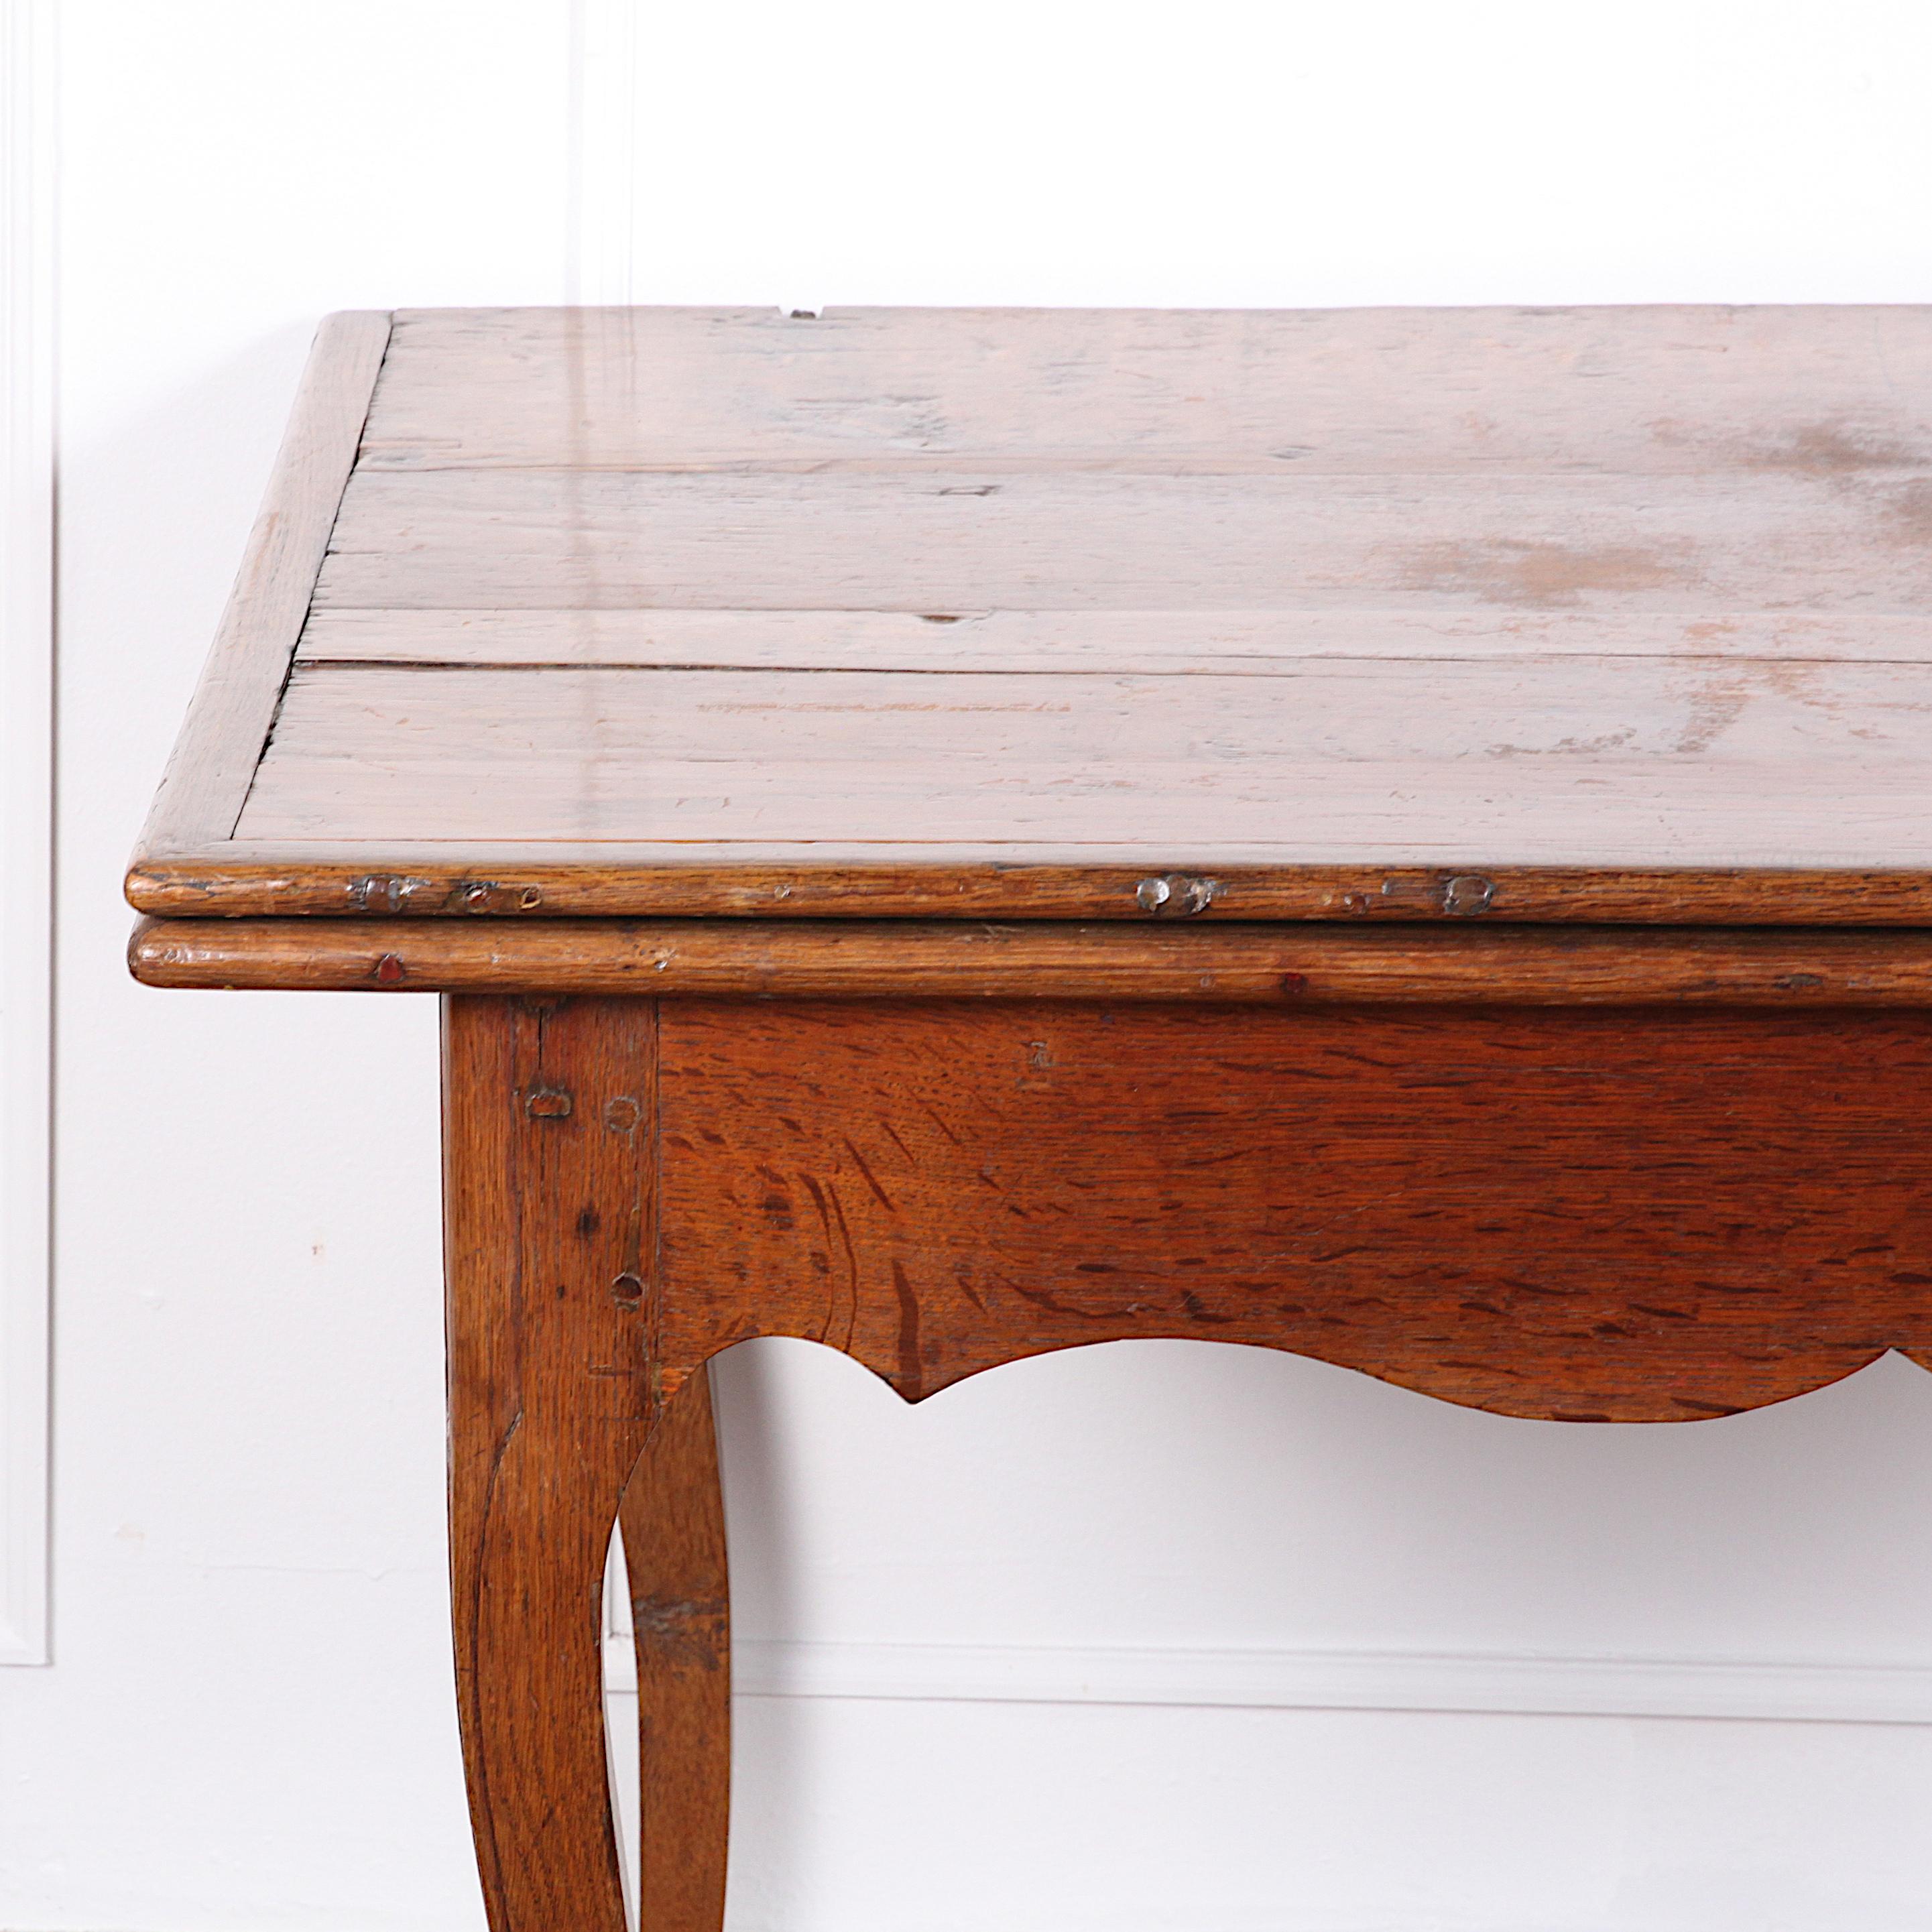 19th century French oak extending farm table with a fold-open top and extending base to support the top when opened. An unusual design and suited to small spaces where occasionally a larger table is desired. Shaped scalloped skirt and simple